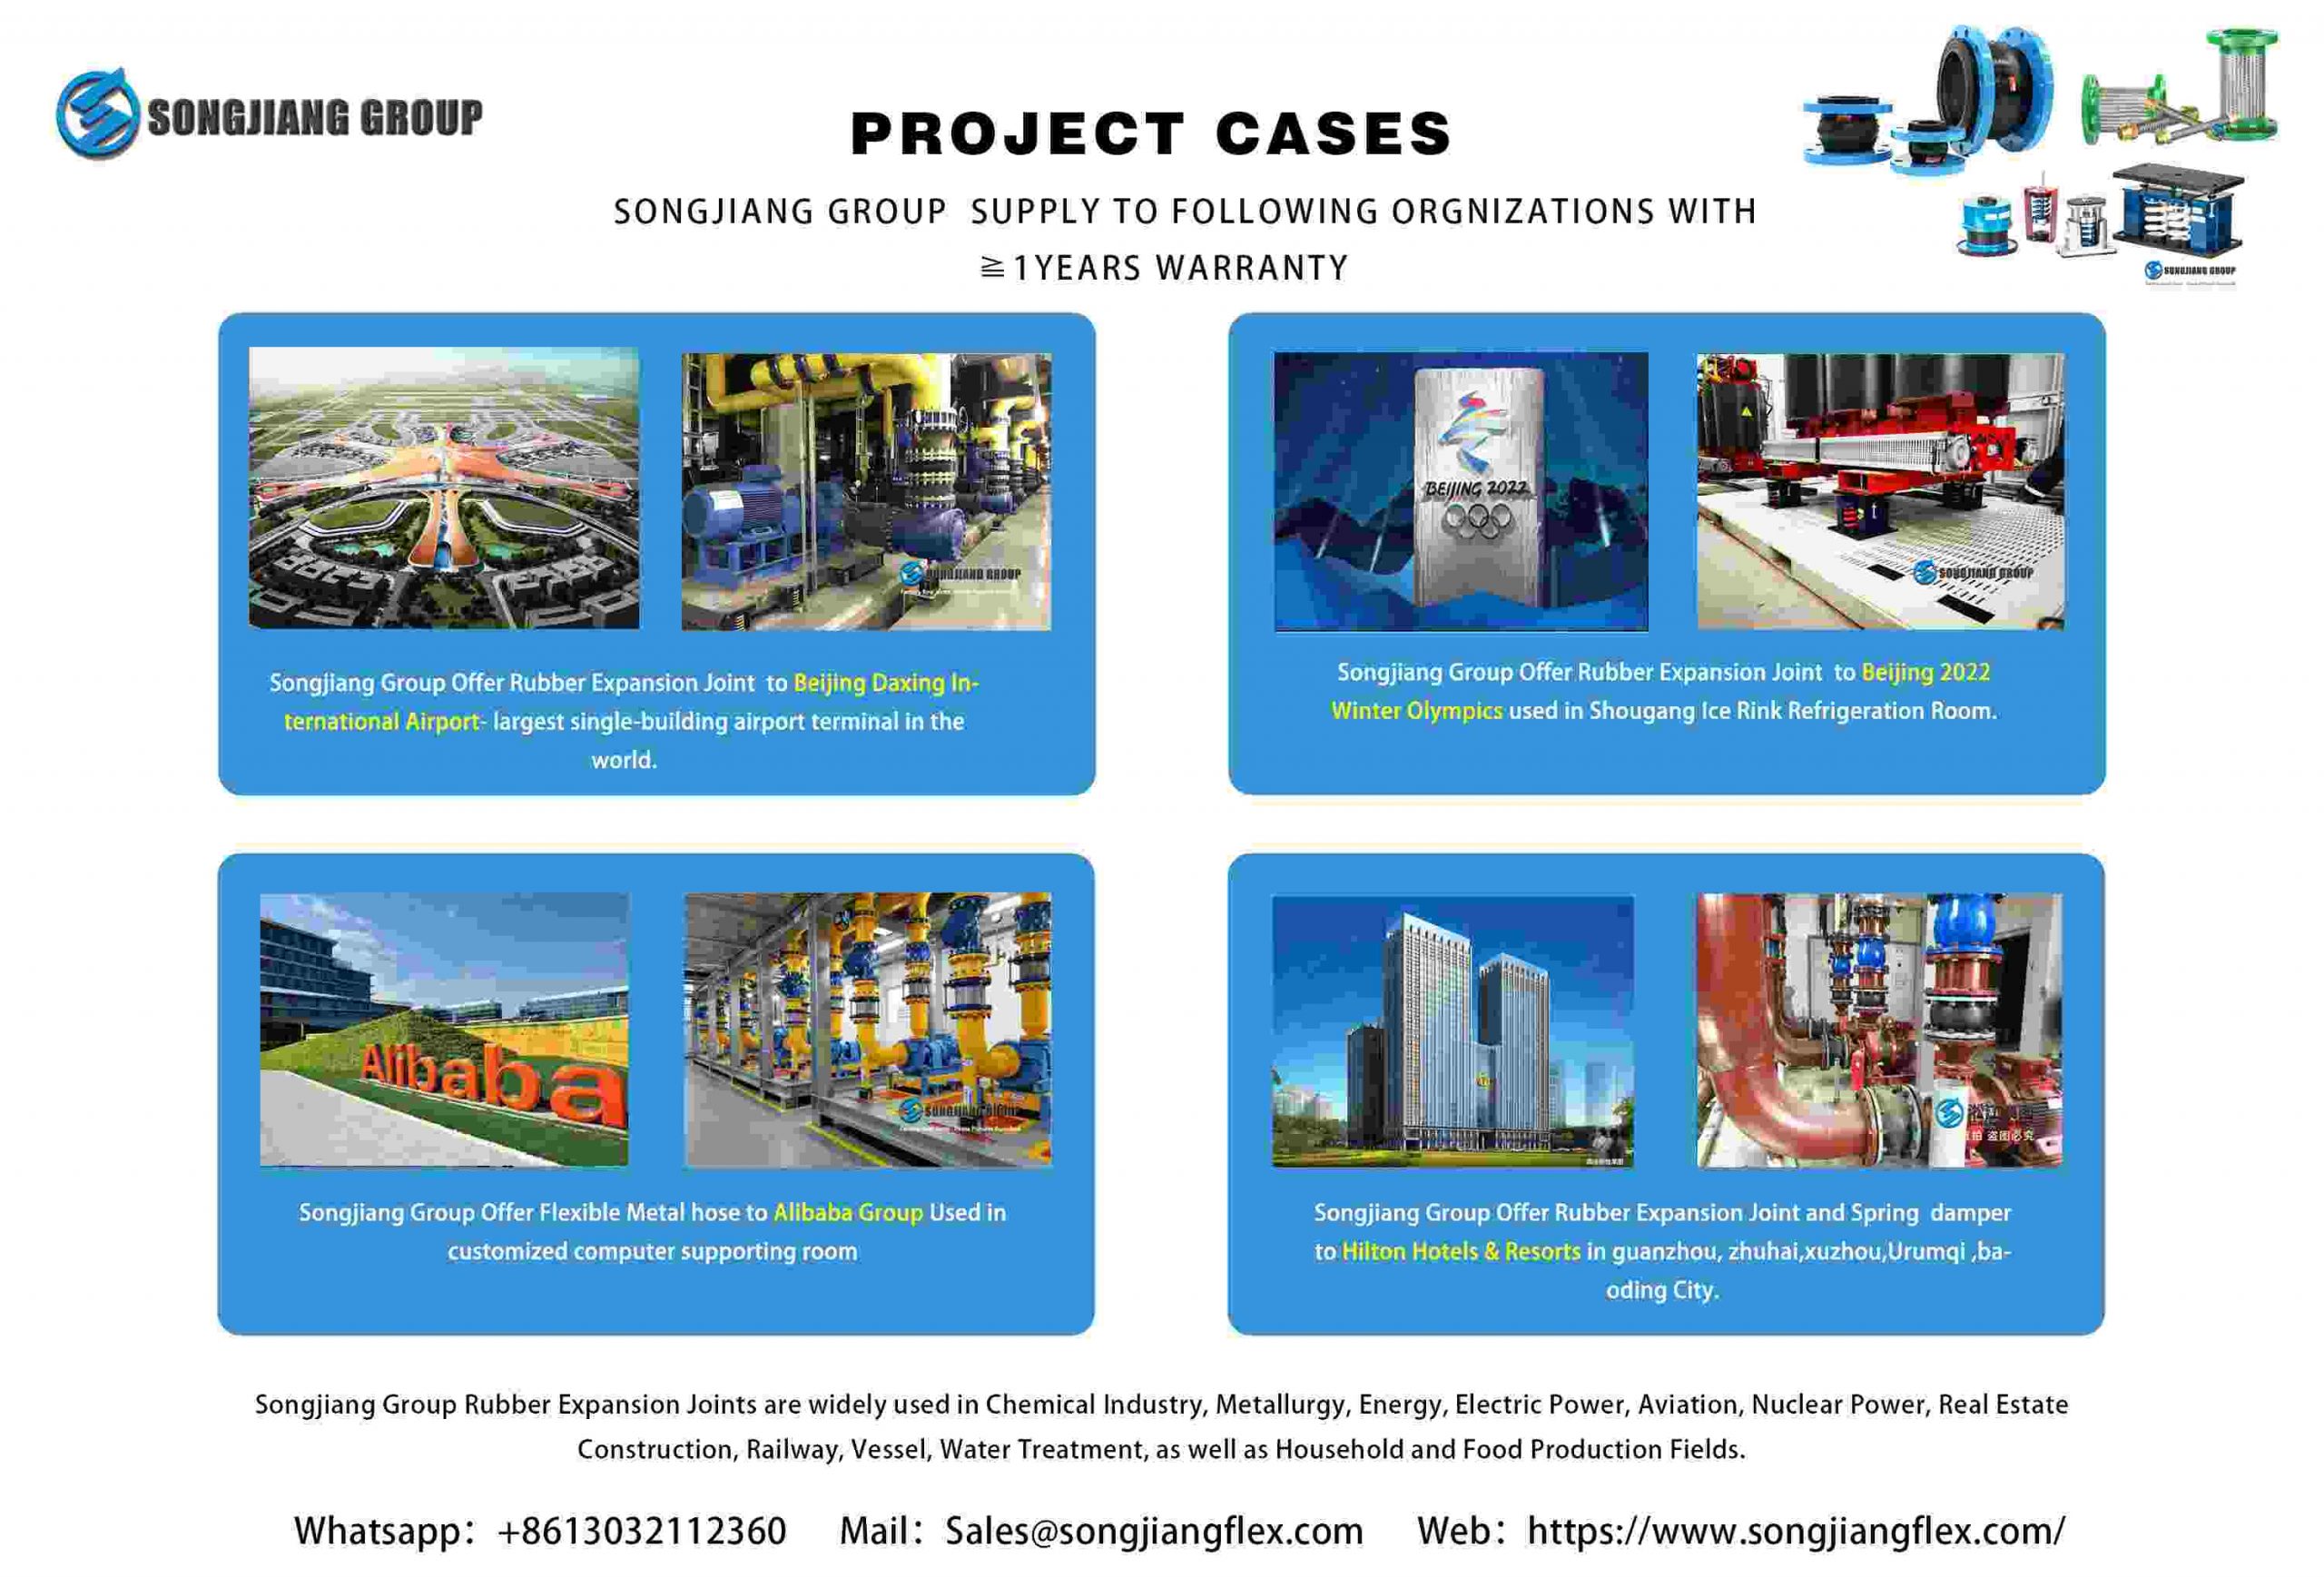 Project Cases done by Songjiang Group